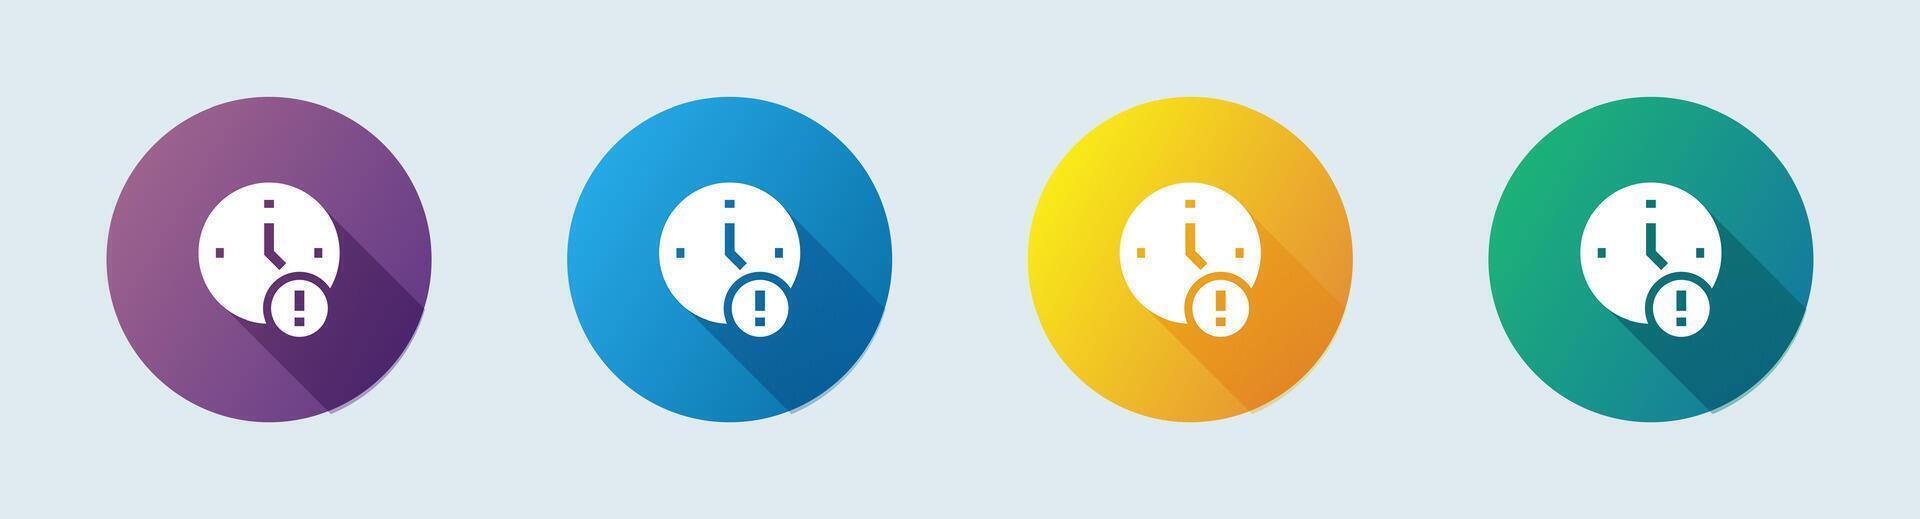 Time out solid icon in flat design style. Deadline signs vector illustration.